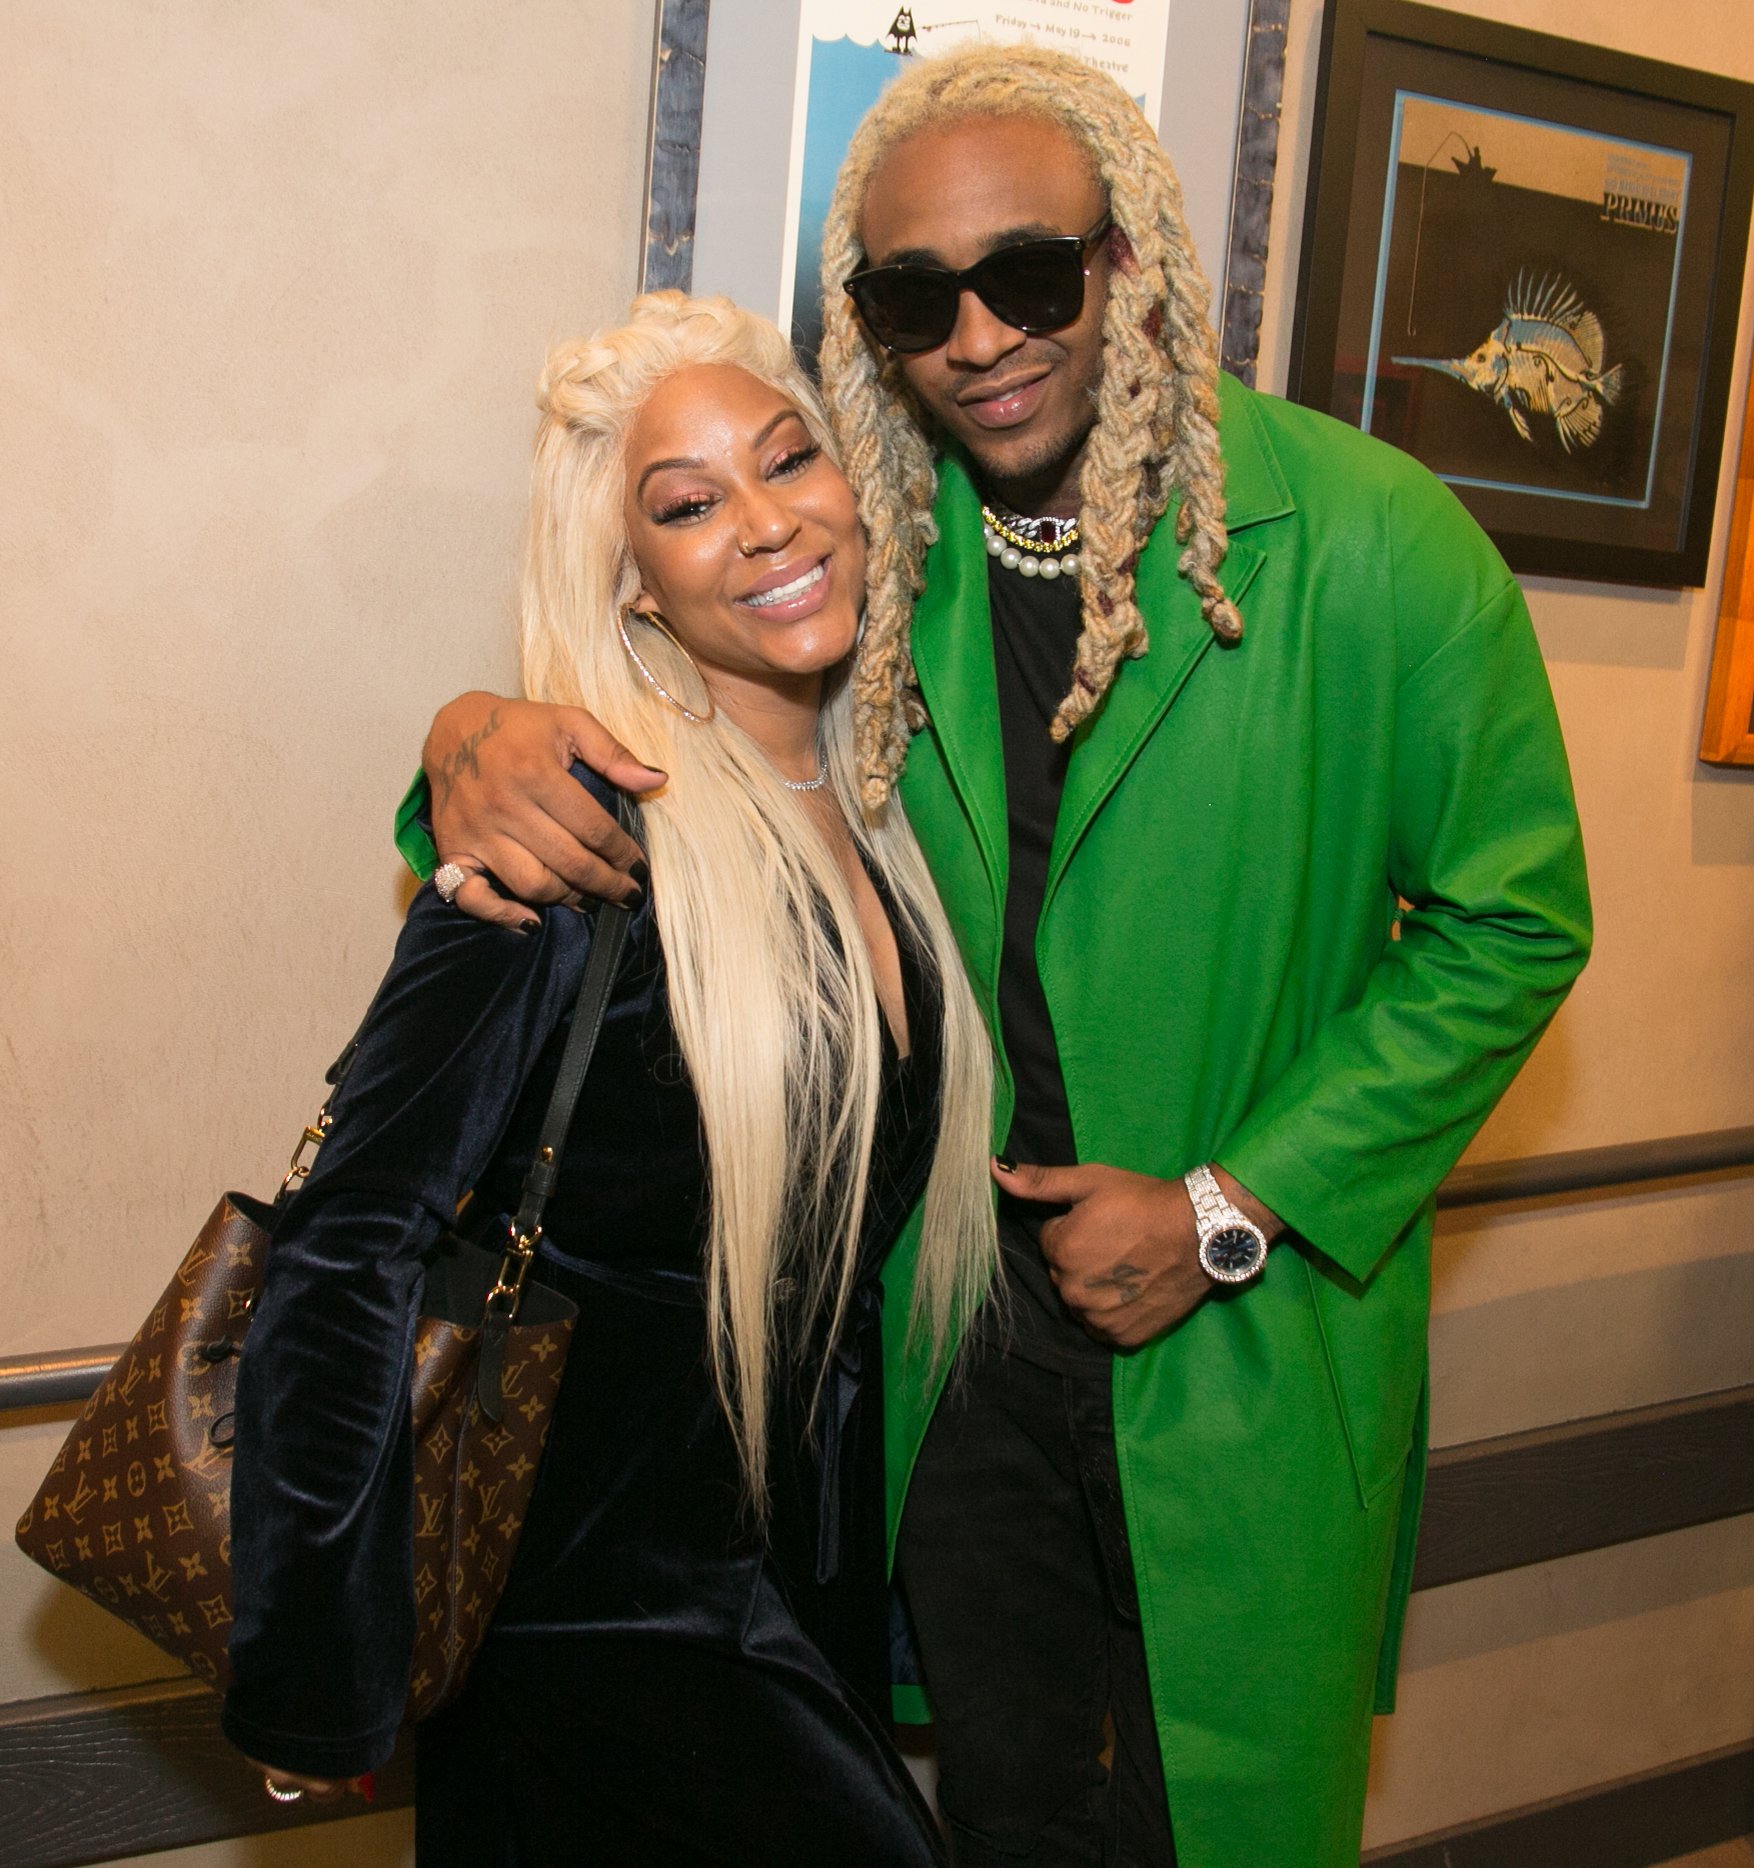  Lyrica Anderson and Floyd Bentley aka A1 attend Ty Dolla $ign in concert at The Novo on April 12, 2018 in Los Angeles, California. | Photo by Gabriel Olsen/Getty Images